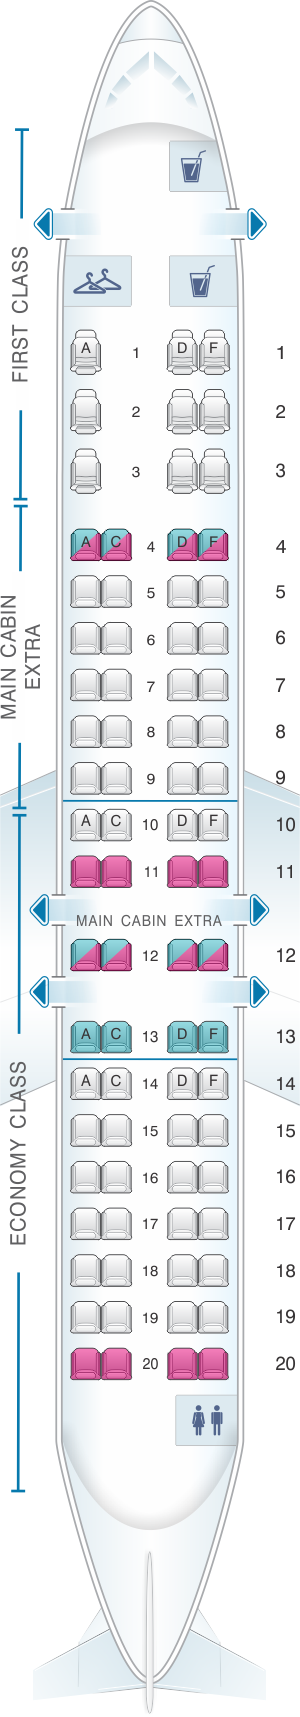 Seat Map American Airlines Crj V Seatmaestro